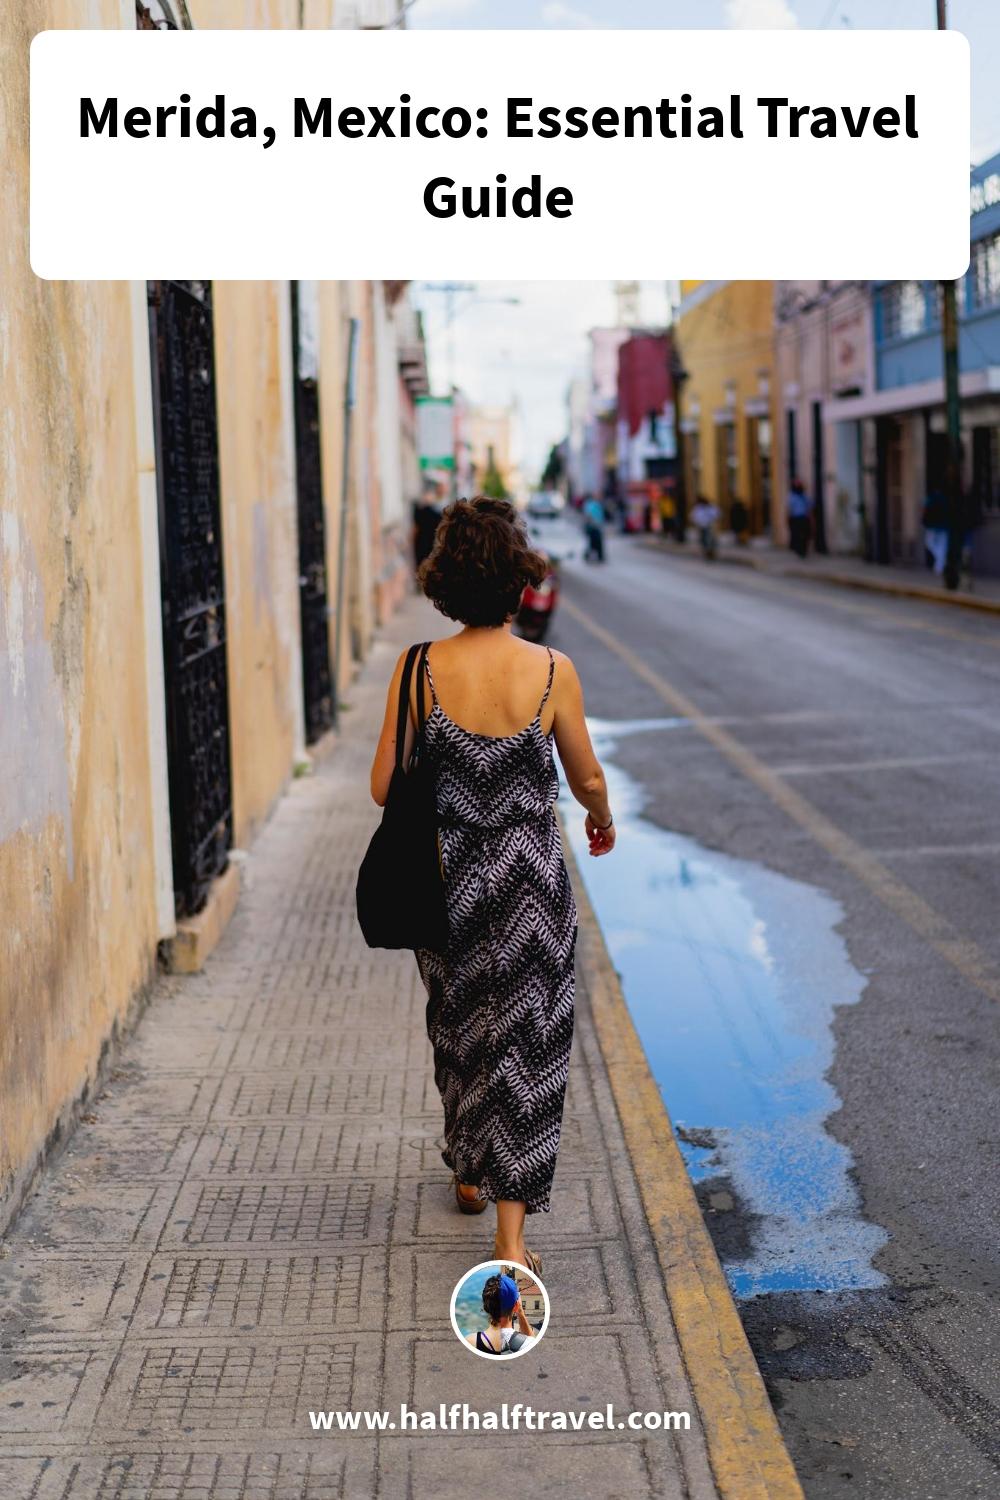 Pinterest image from the 'Merida, Mexico: Essential Travel Guide' article on Half Half Travel